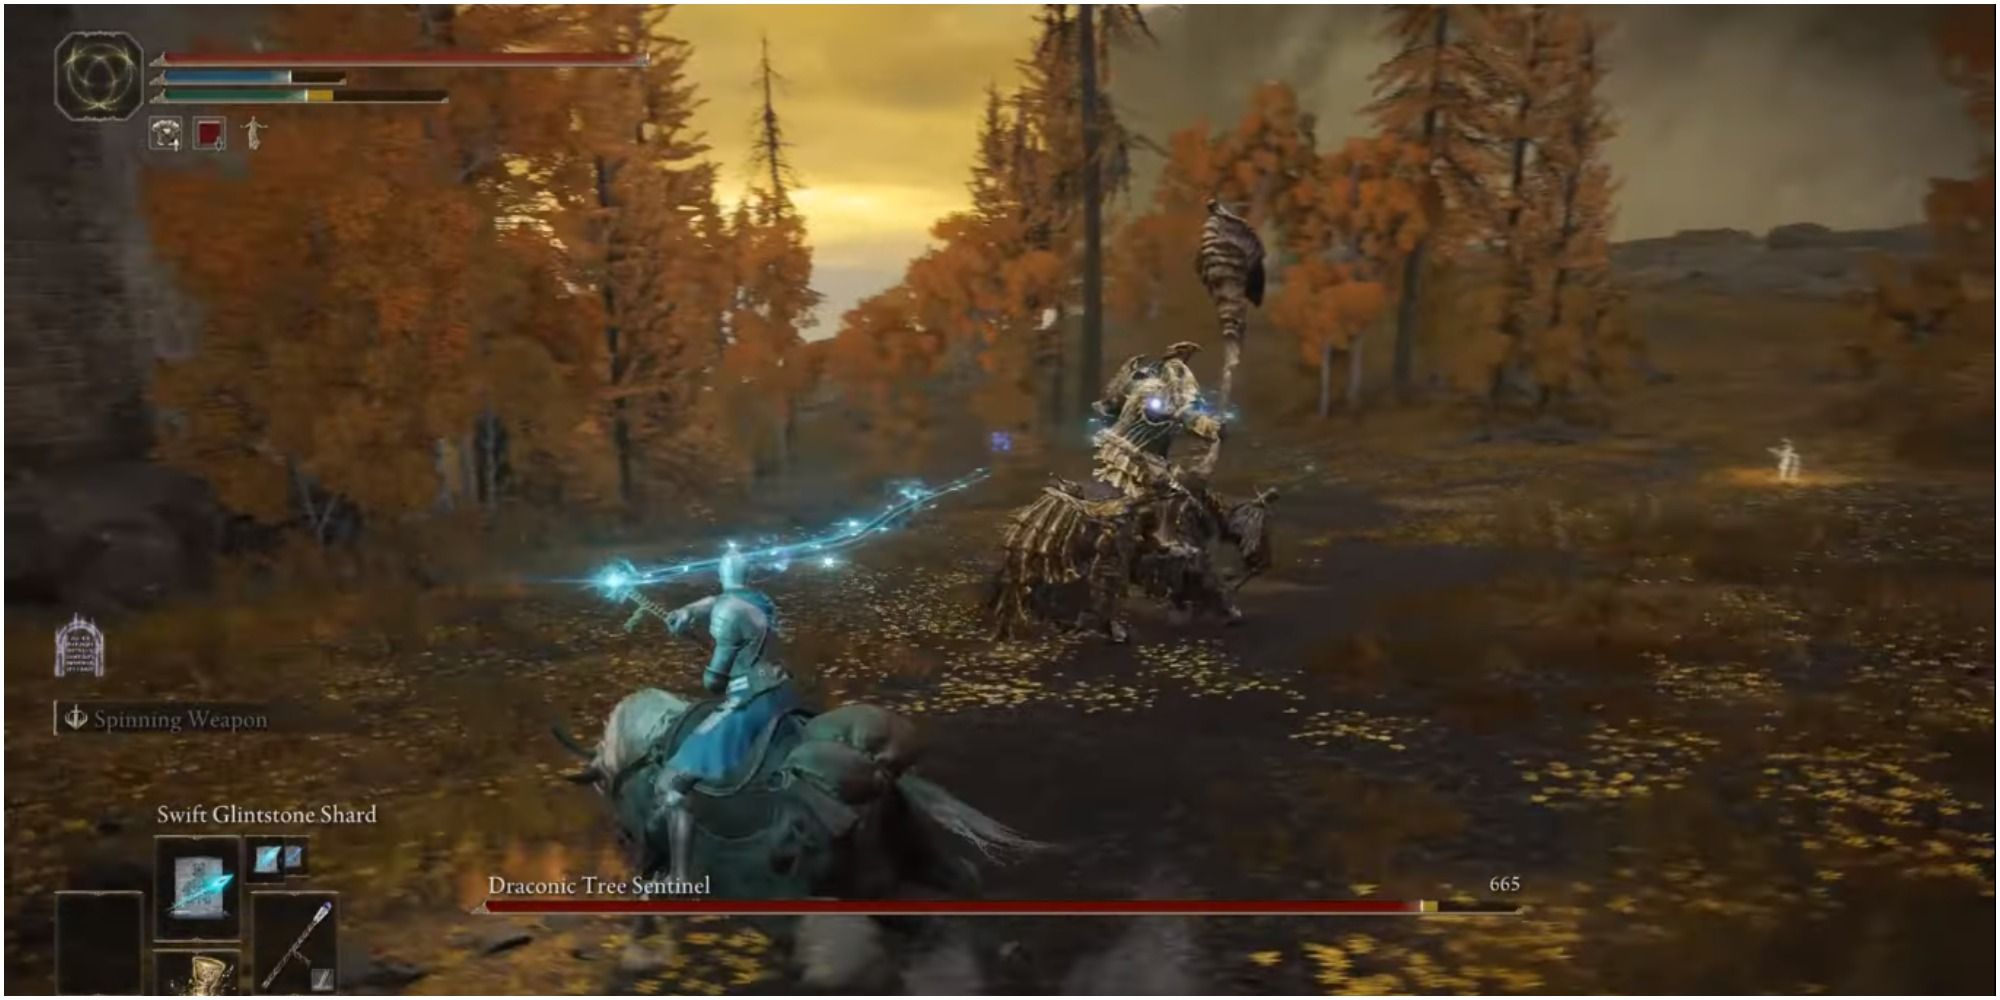 The player using Sorcery against the boss.